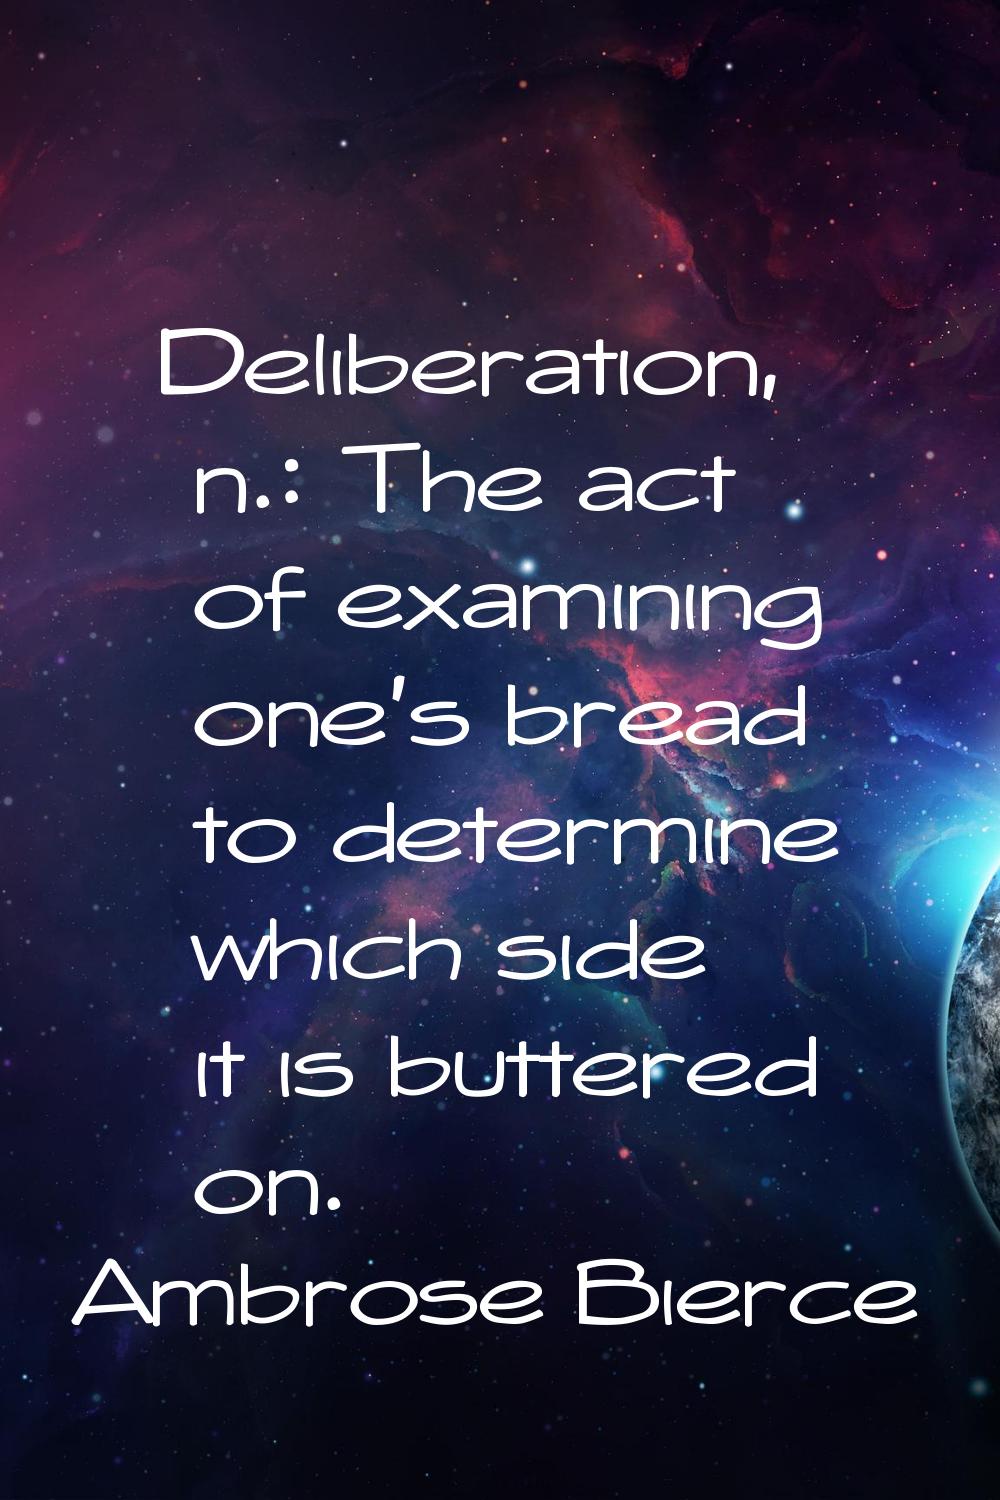 Deliberation, n.: The act of examining one's bread to determine which side it is buttered on.